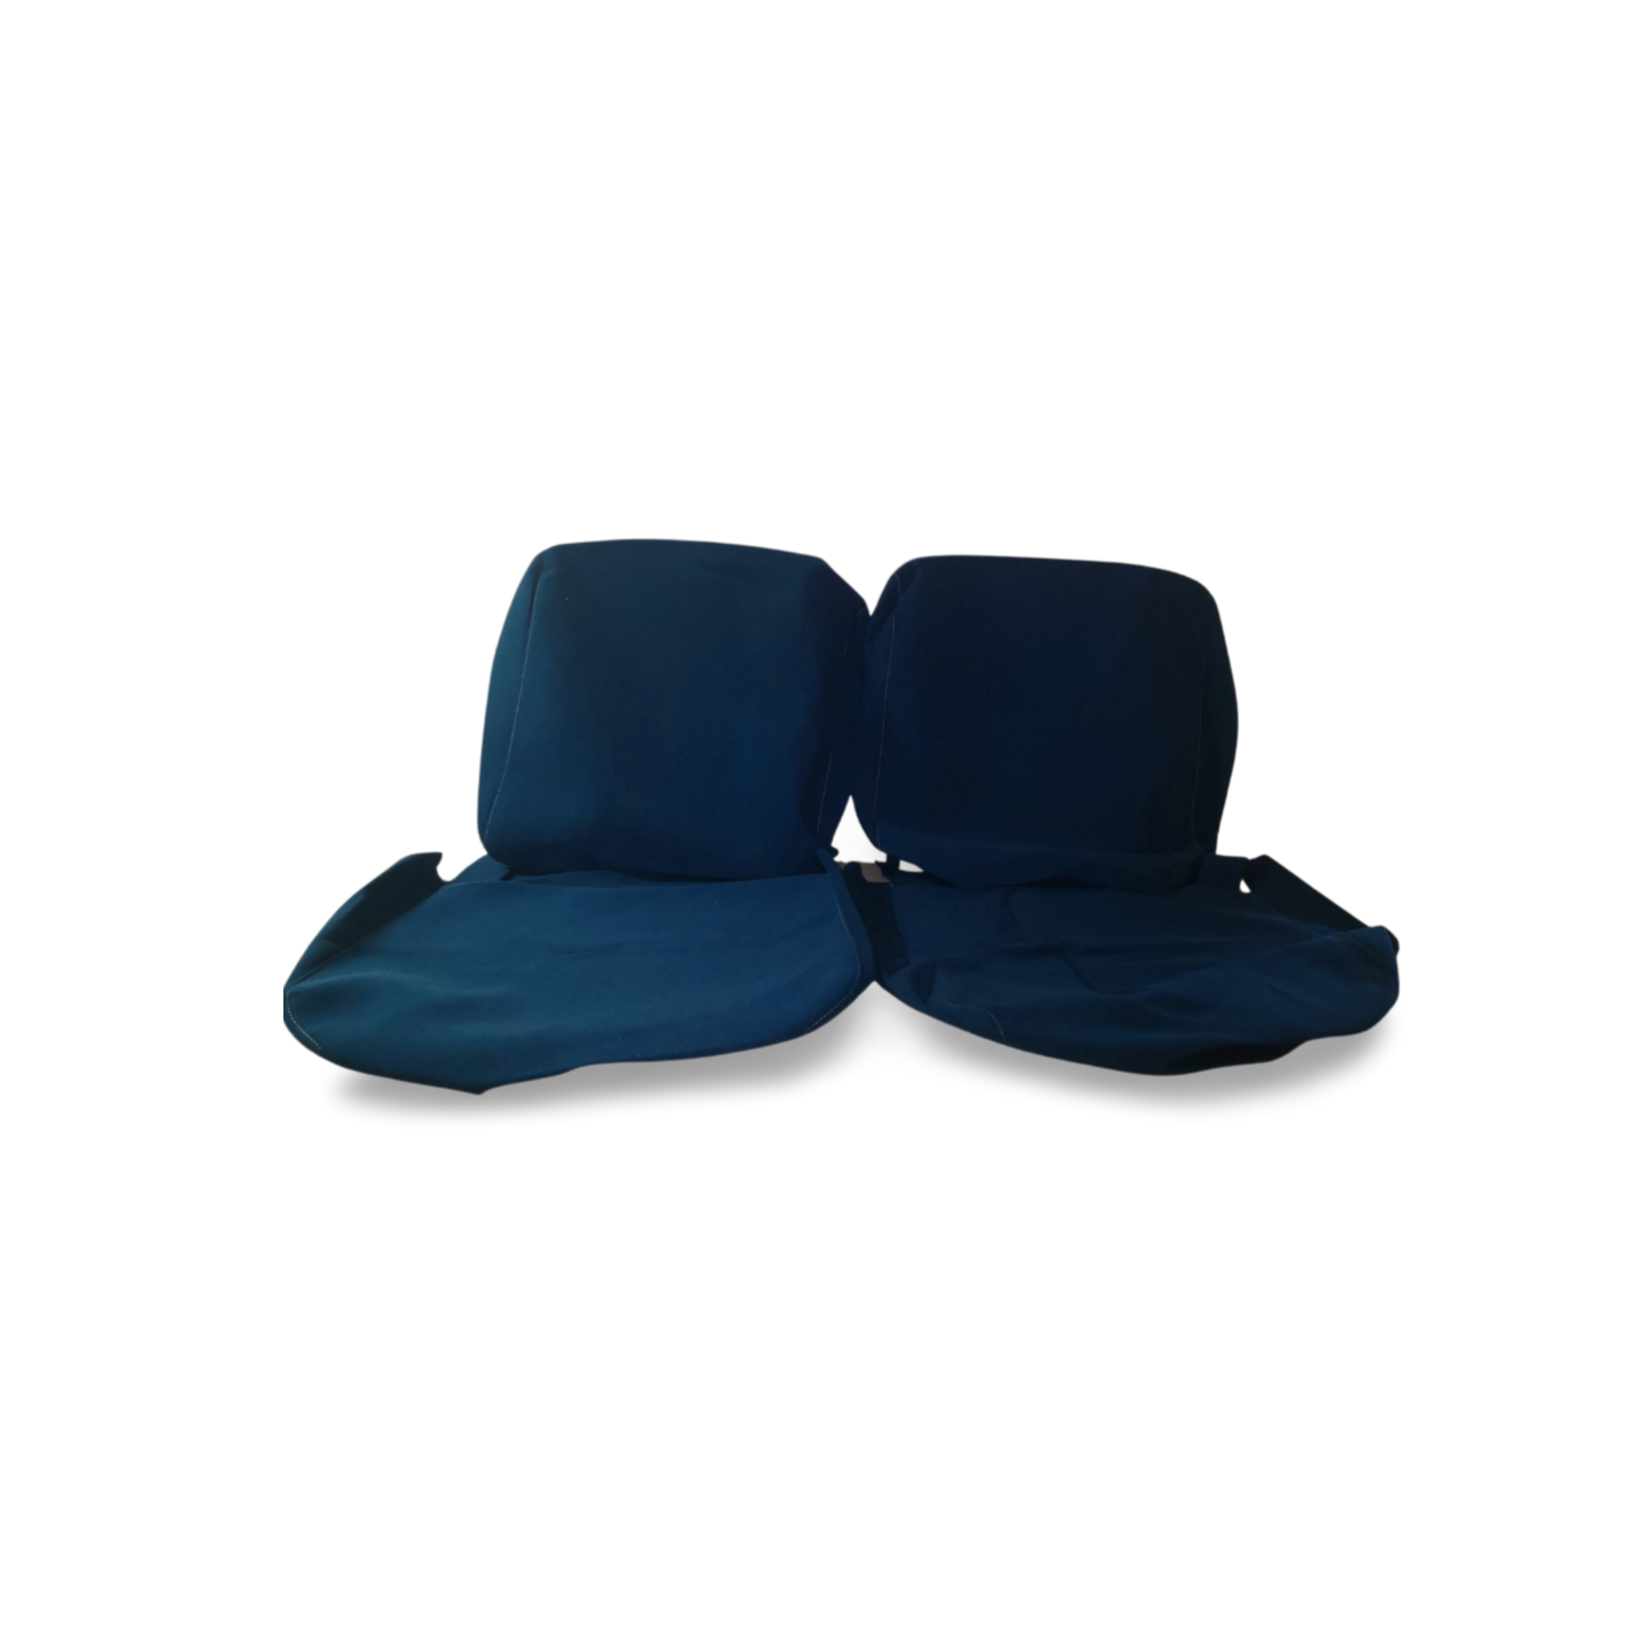 Upholstery set Jersey blue 63/73 (with armrest bench 20cm) non Pallas 09/62-07/69 Nr Org: Interior - Image 63/73